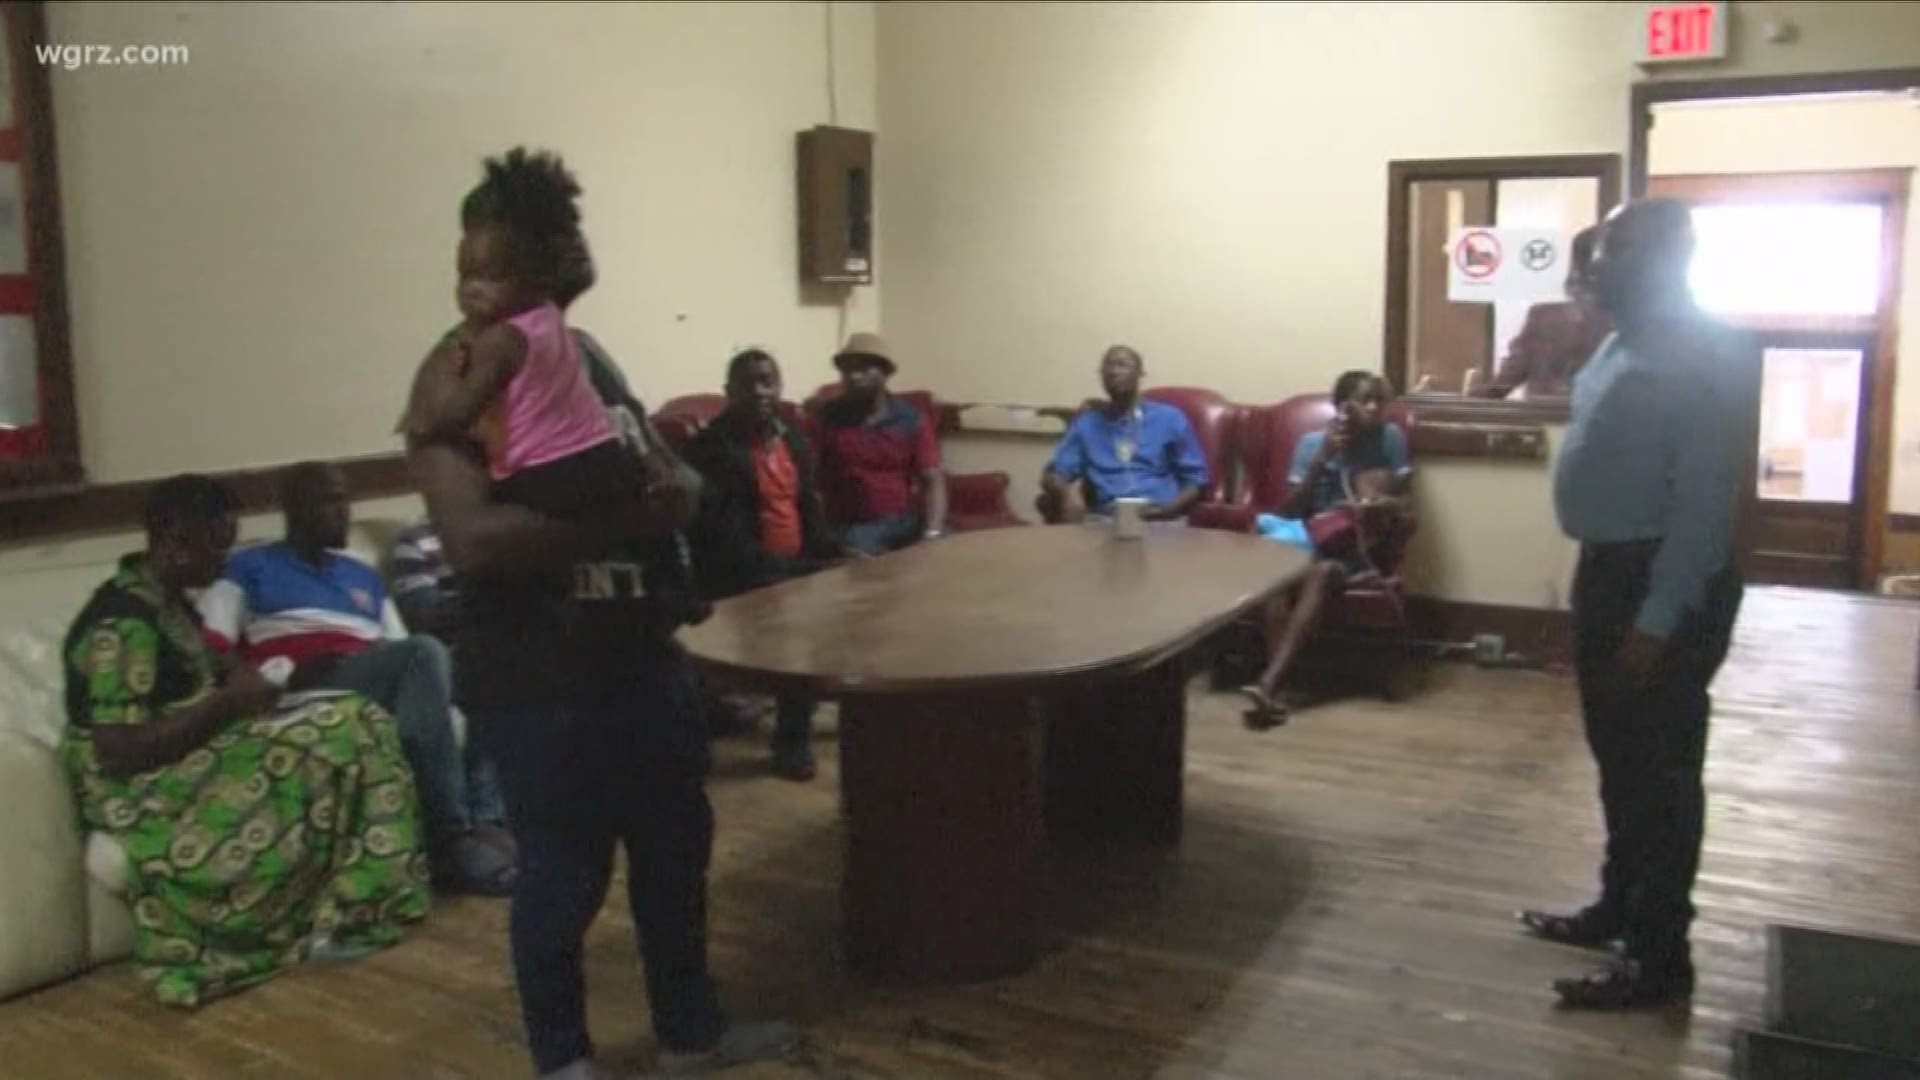 More than 100 refugees from the Democratic Republic of the Congo have recently arrived in the Buffalo area.